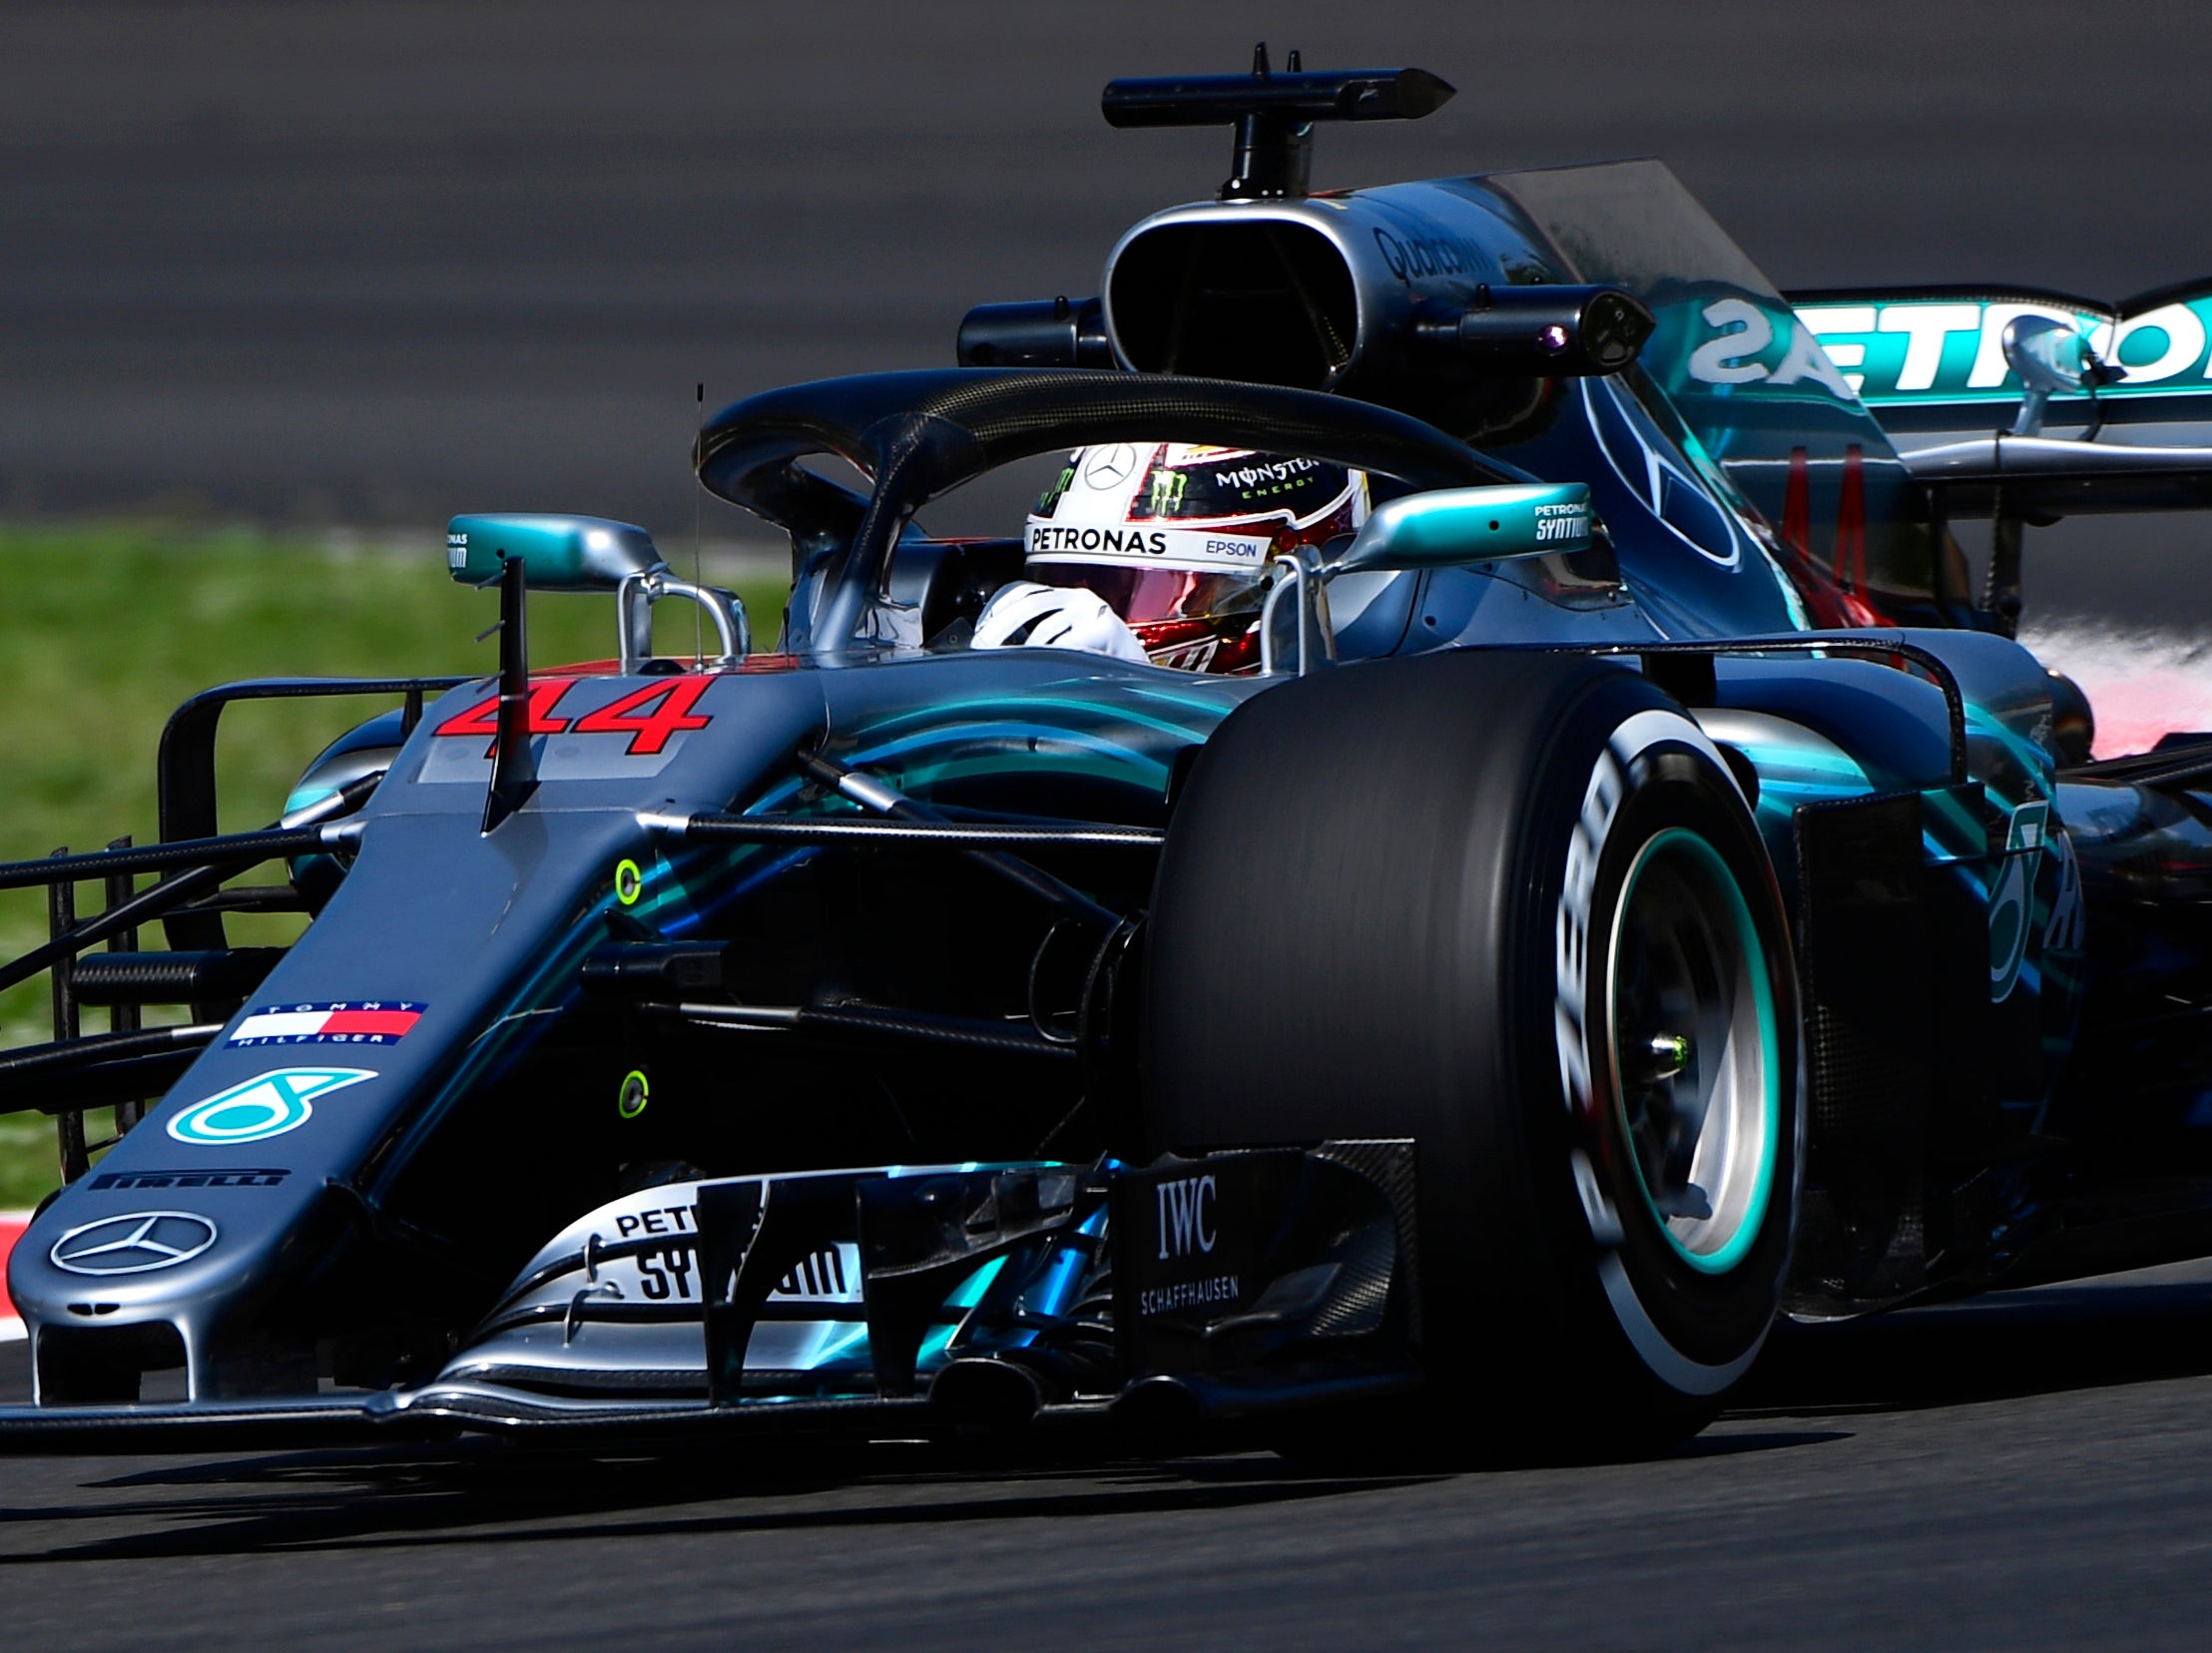 Valtteri Bottas and Lewis Hamilton dominated the windy practice sessions